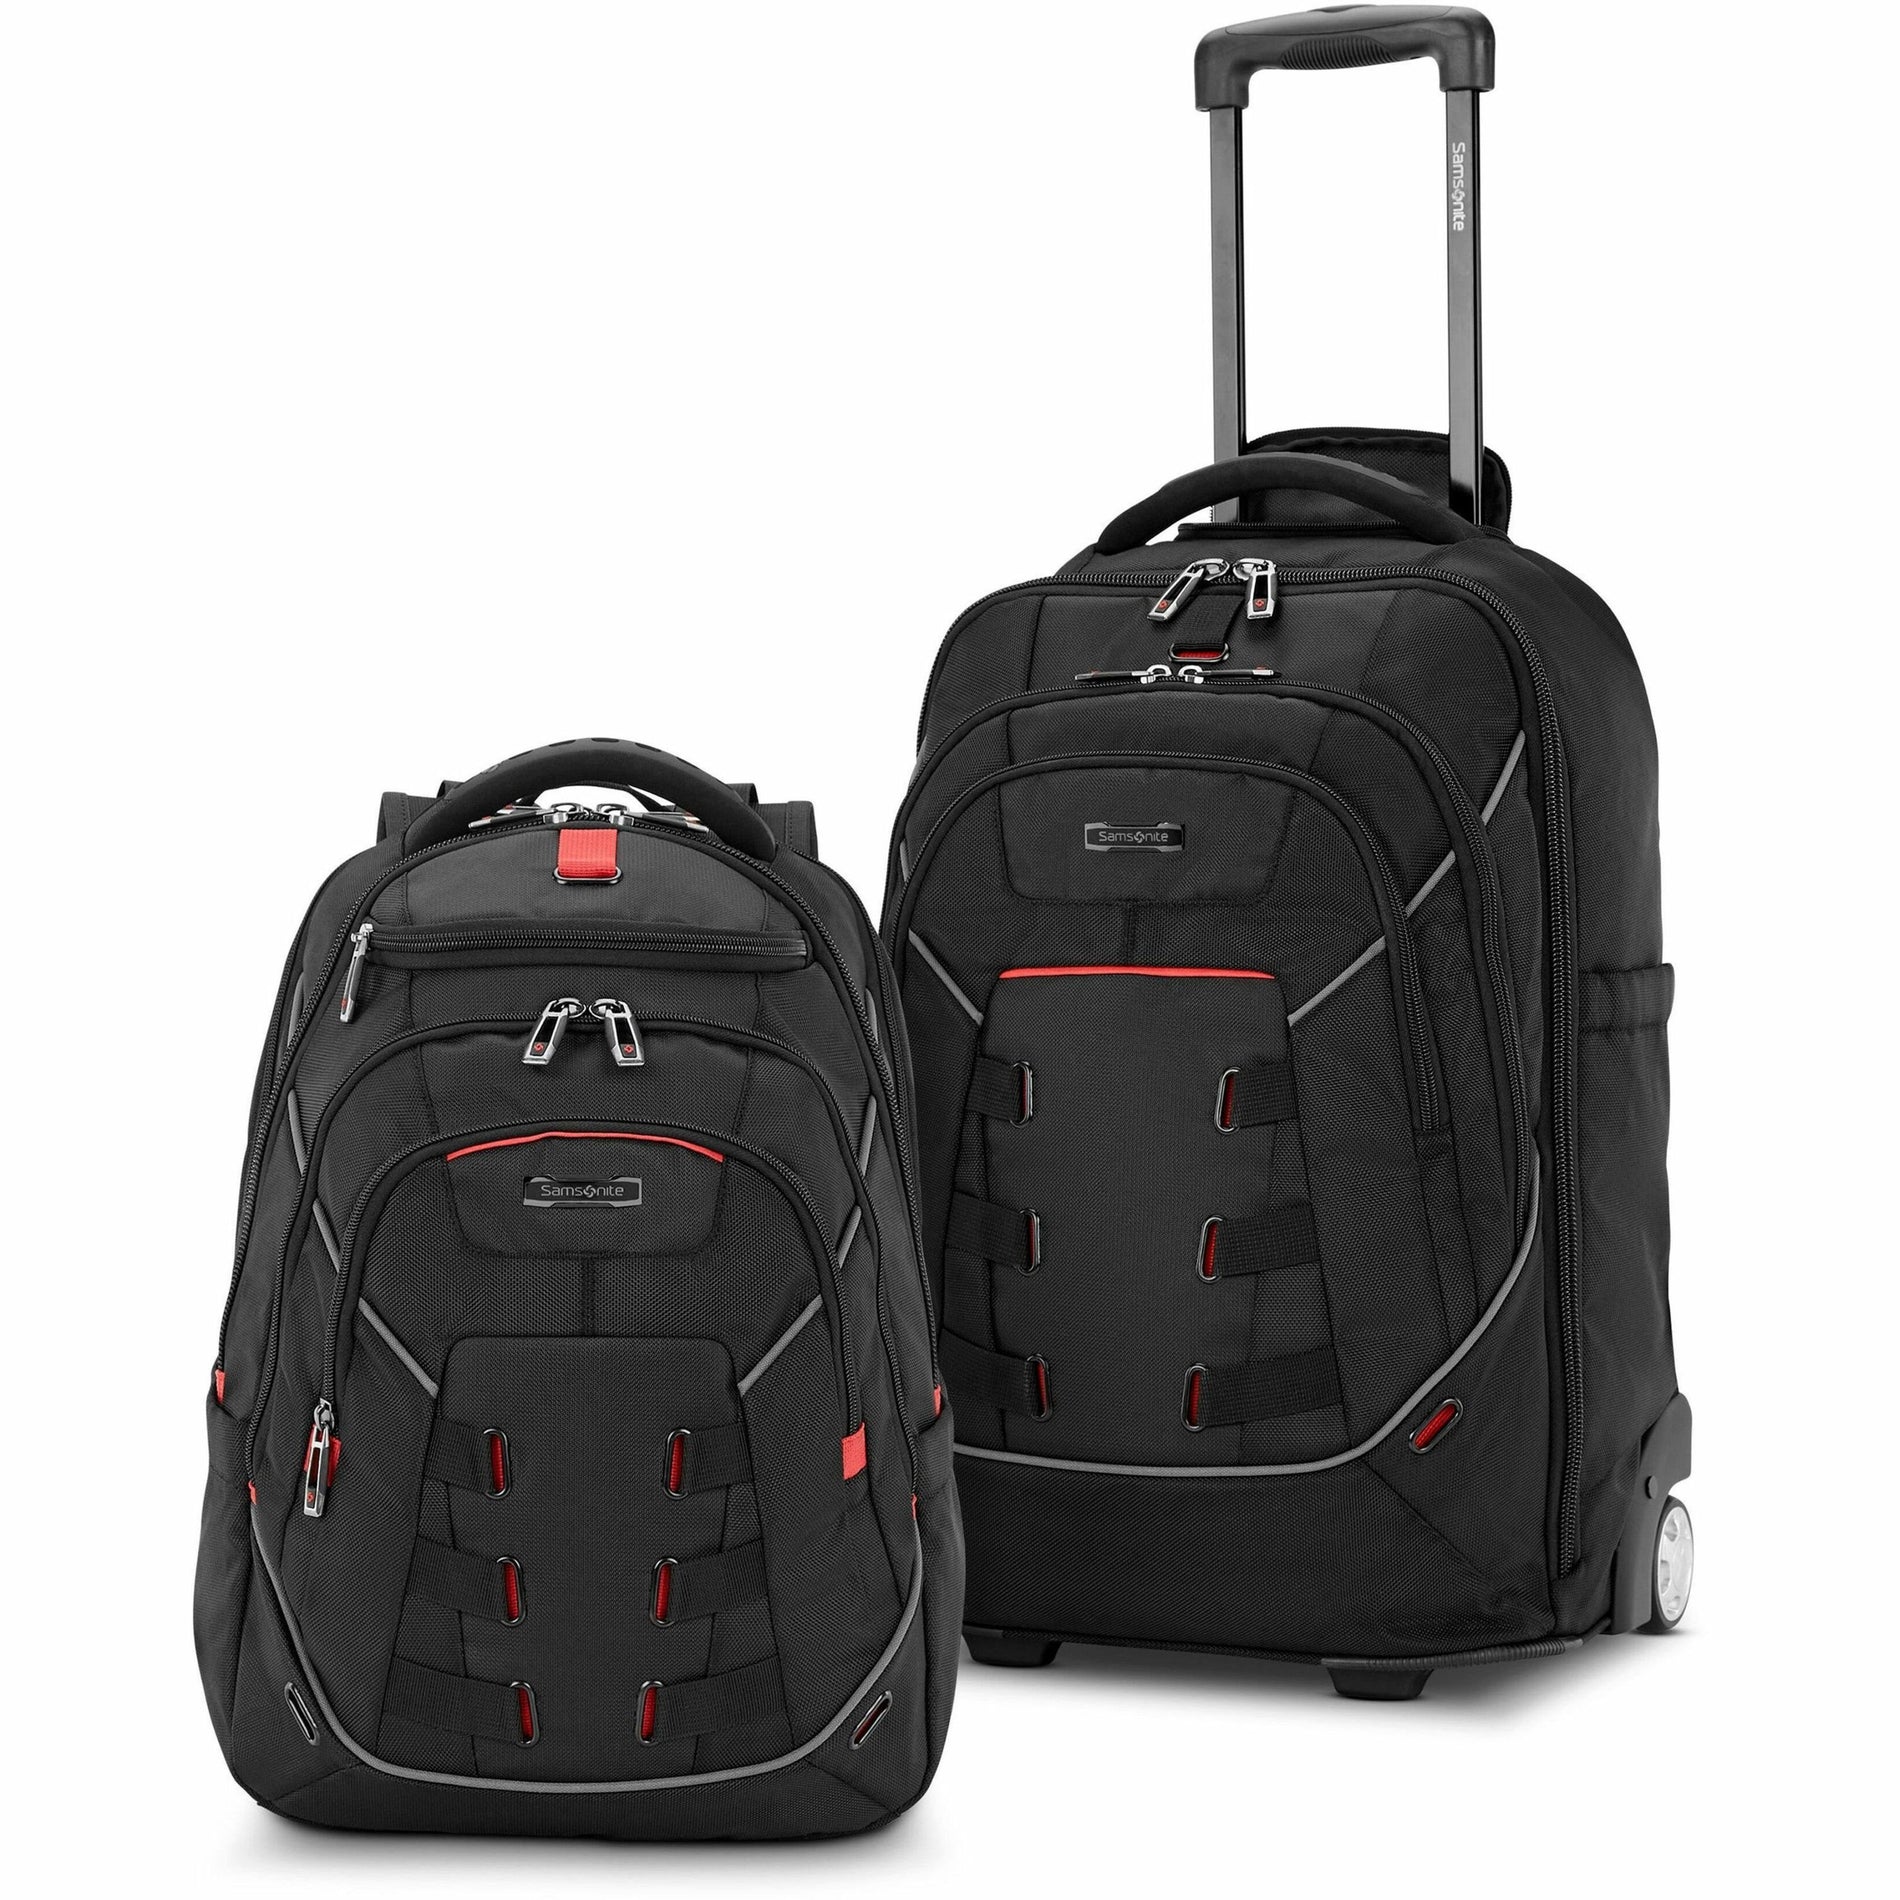 Samsonite 145090-1041 Tectonic Nutech Wheeled Backpack, Water Resistant, 10 Year Warranty, Tablet and Notebook Storage